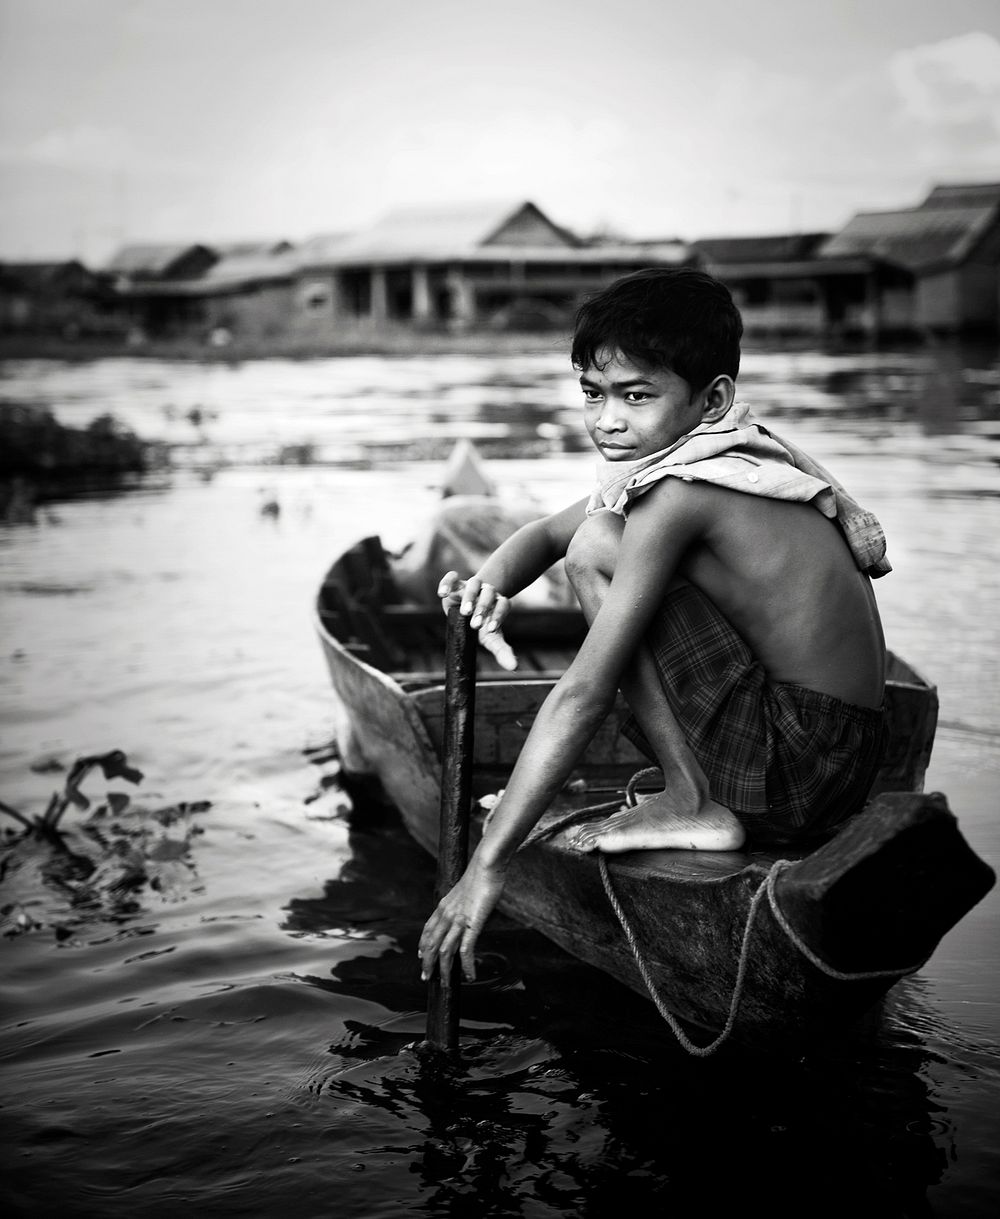 Asian young man sitting on the wooden boat in the river grayscale